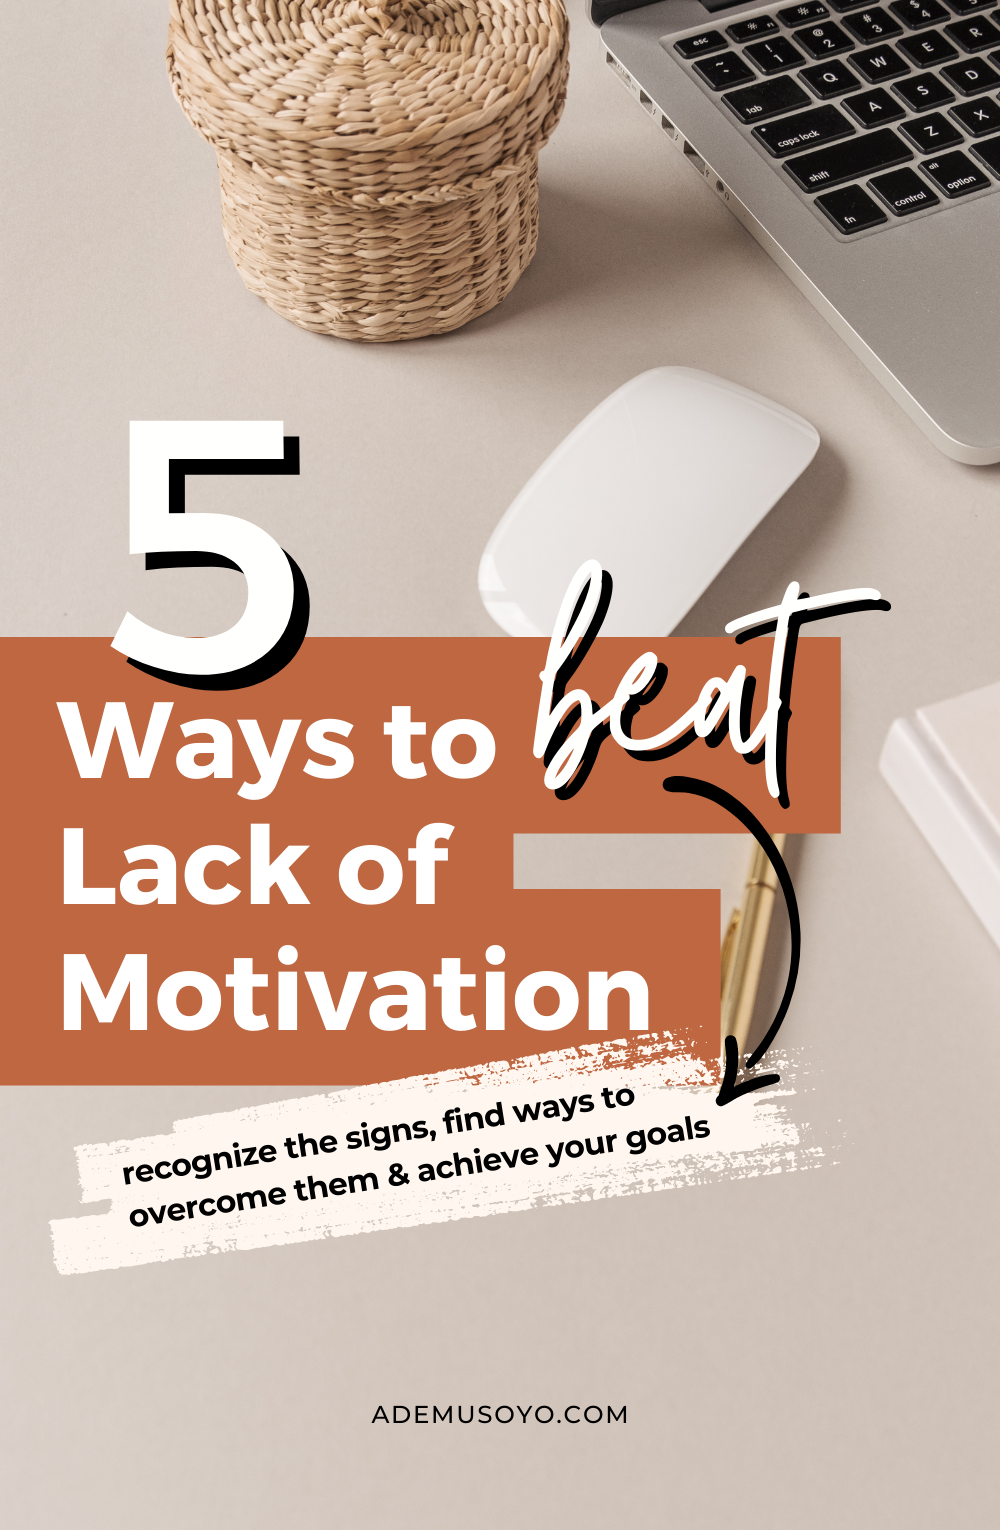 a photo of a laptop and a mouse with text overlay on the side that says 5 ways to beat lack of motivation. recognize the signs, find ways to overcome them and achieve your goals